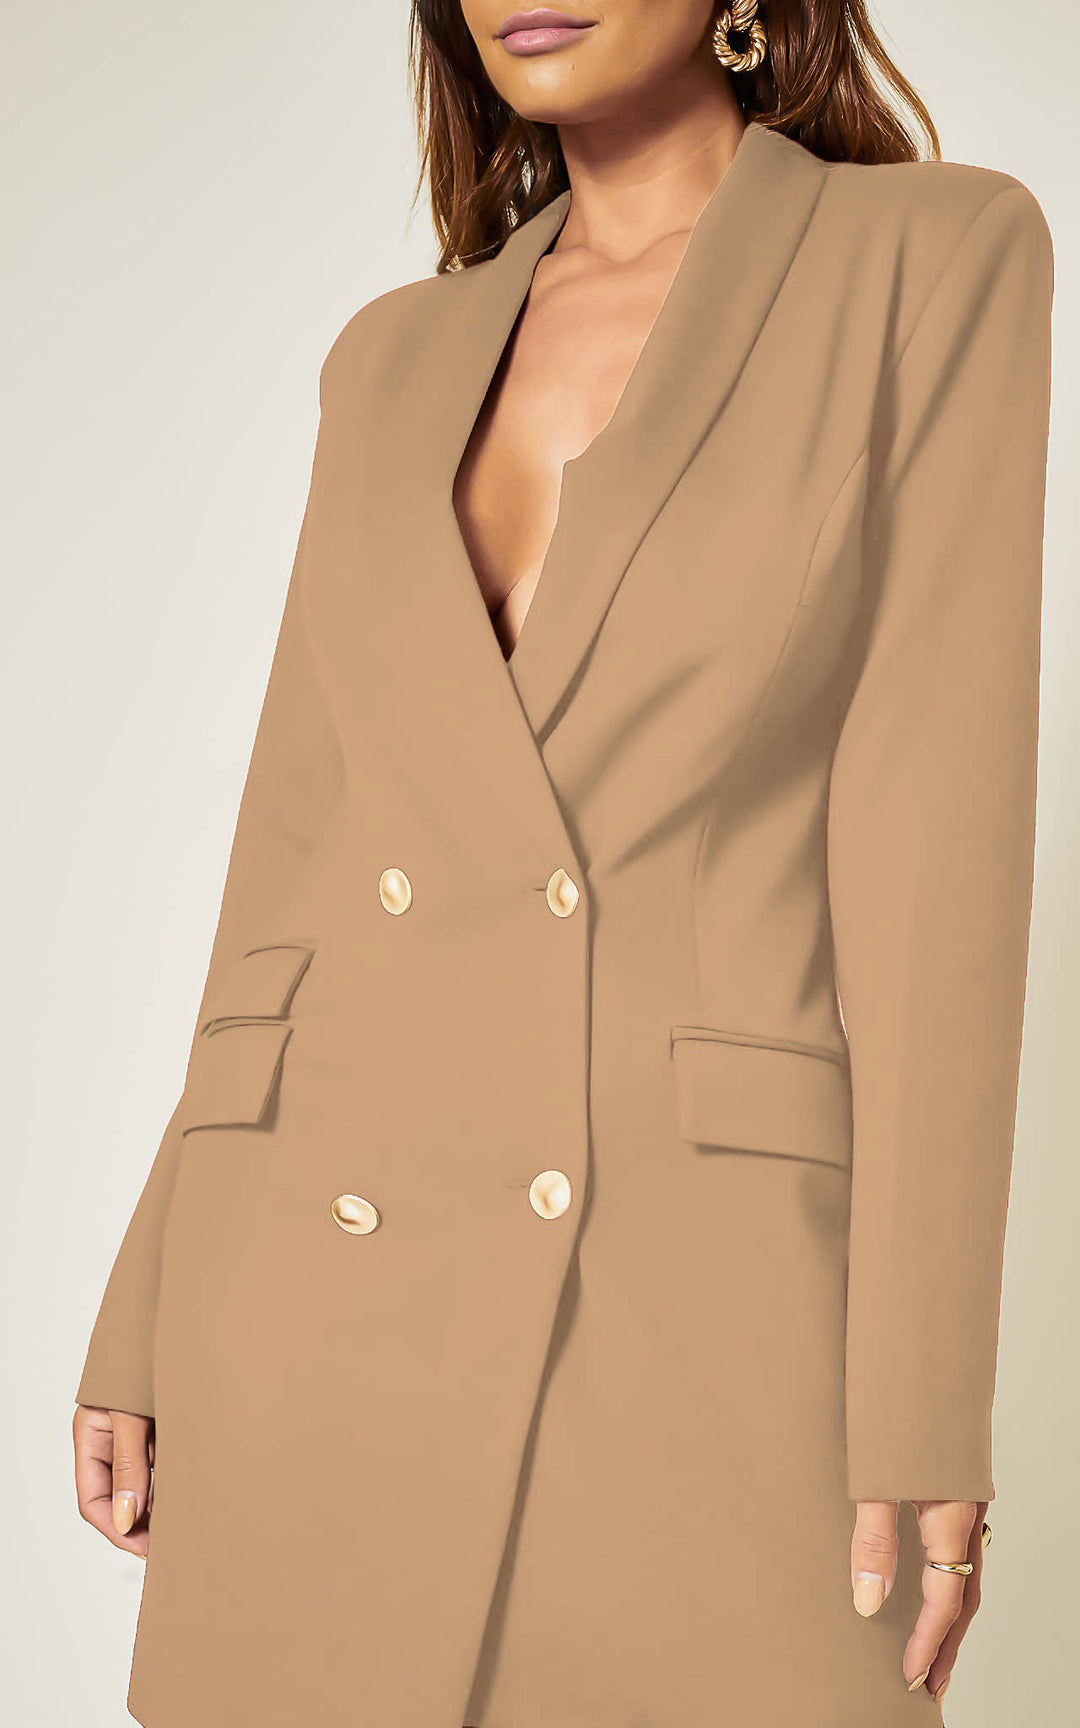 Luxe Stain Breasted Asymmetric Blazer Dress In Light Brown